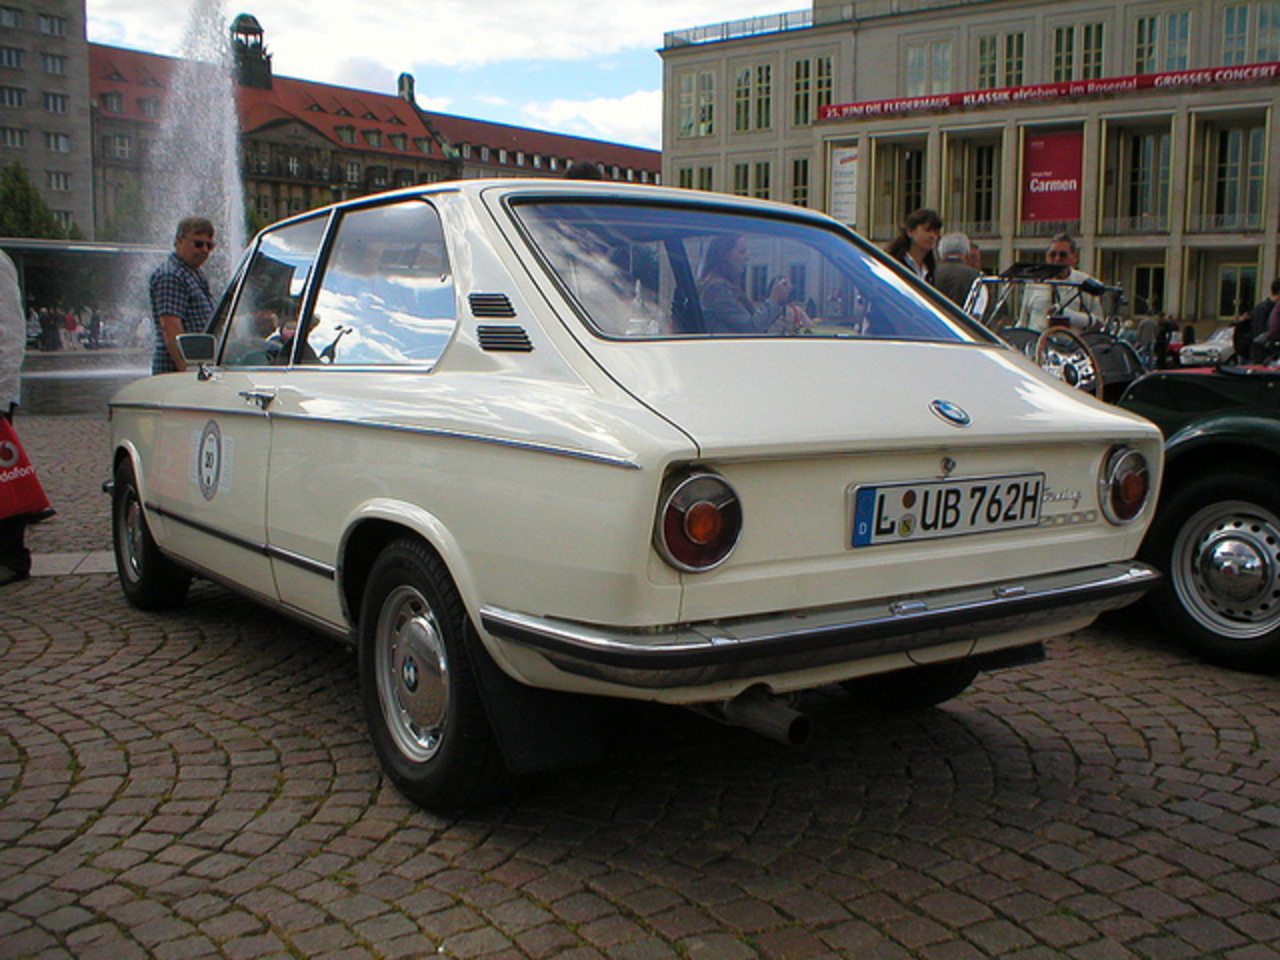 BMW 2000 Touring (1971) | Flickr - Photo Sharing!